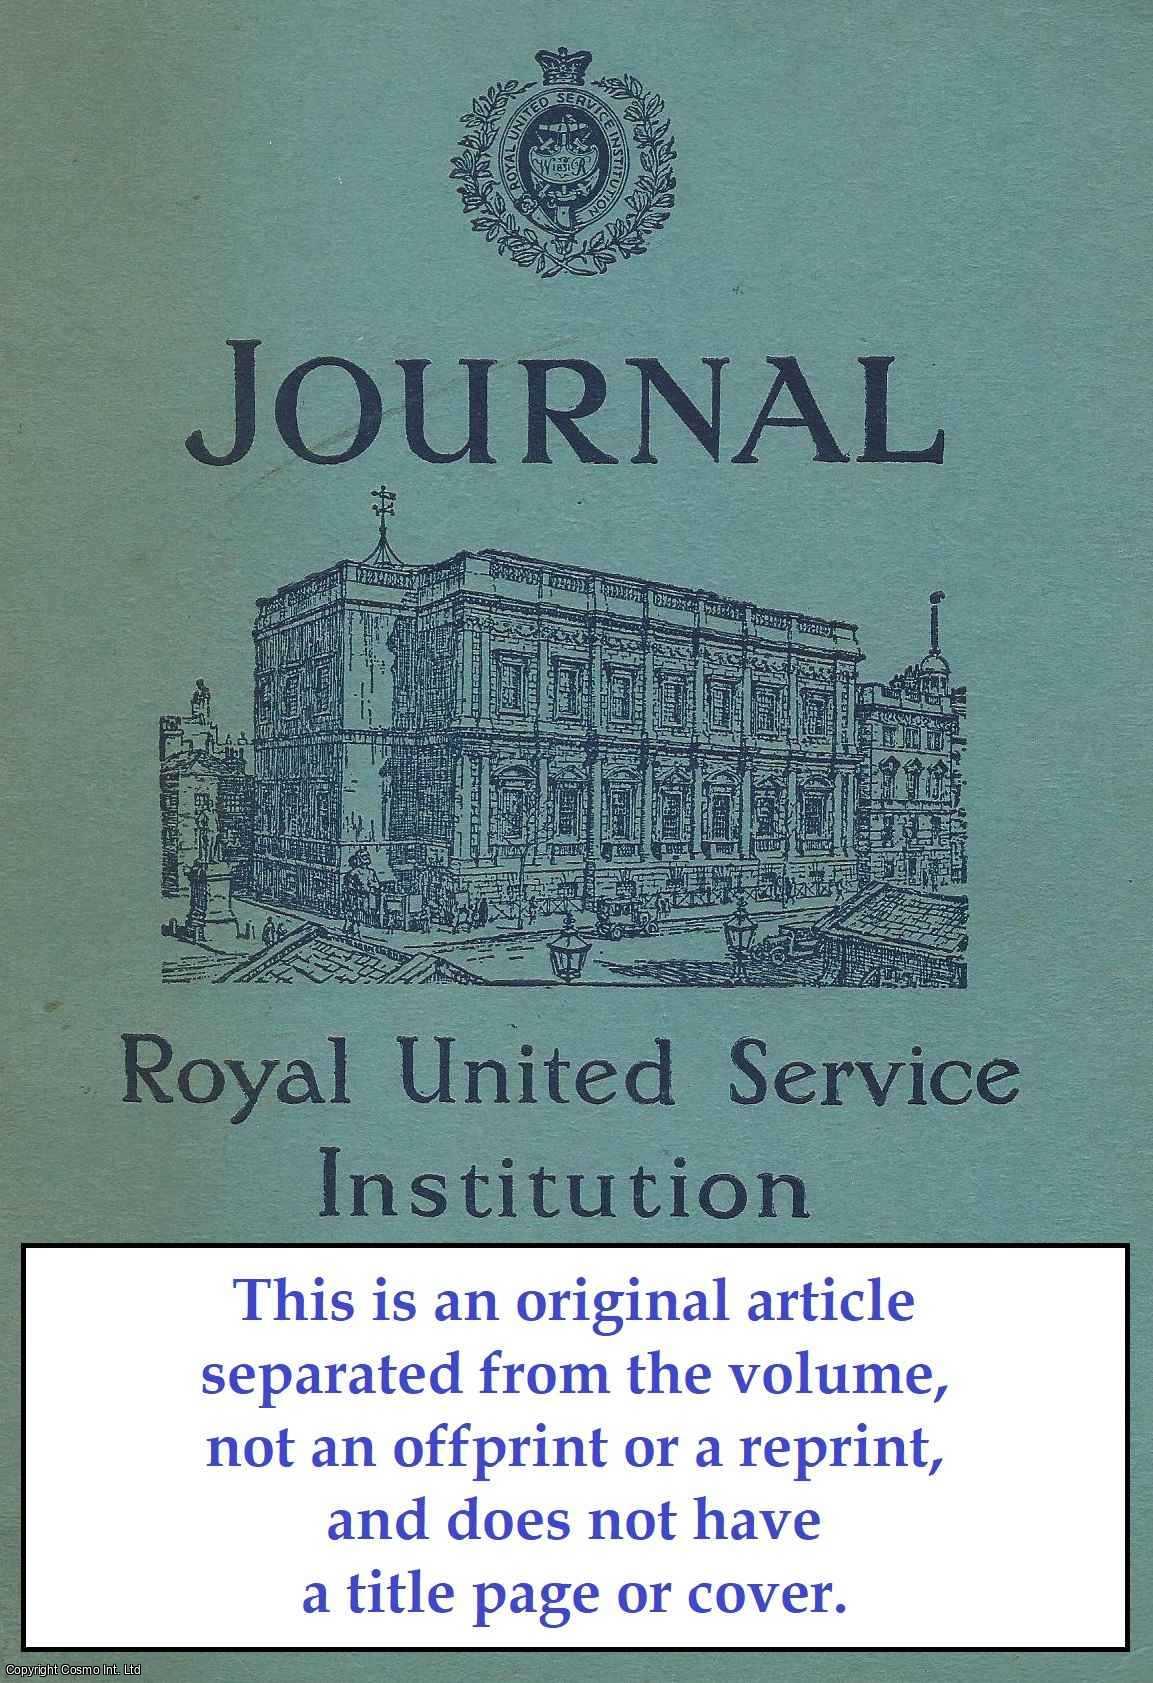 T. J. Edwards - Precedence of Administrative Department and Corps. An original article from Journal of The Royal United Service Institution, 1956.